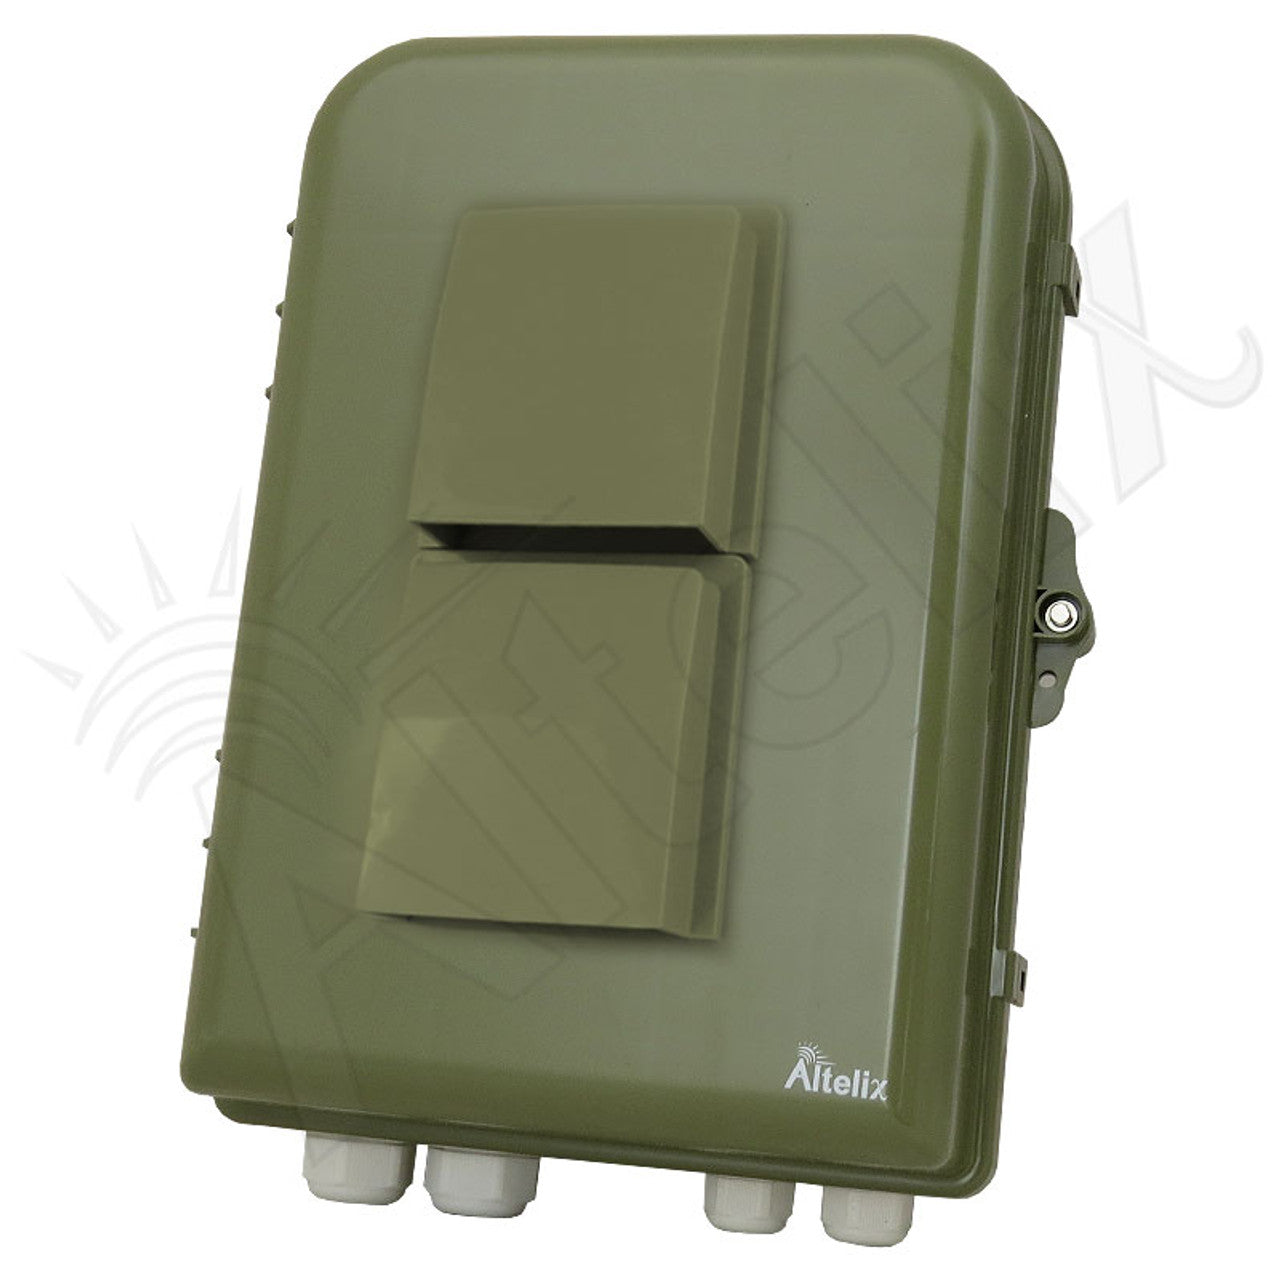 Buy green Altelix 15x10x5 Polycarbonate + ABS Vented Weatherproof Enclosure with Aluminum Mounting Plate, 120 VAC Outlet &amp; Power Cord